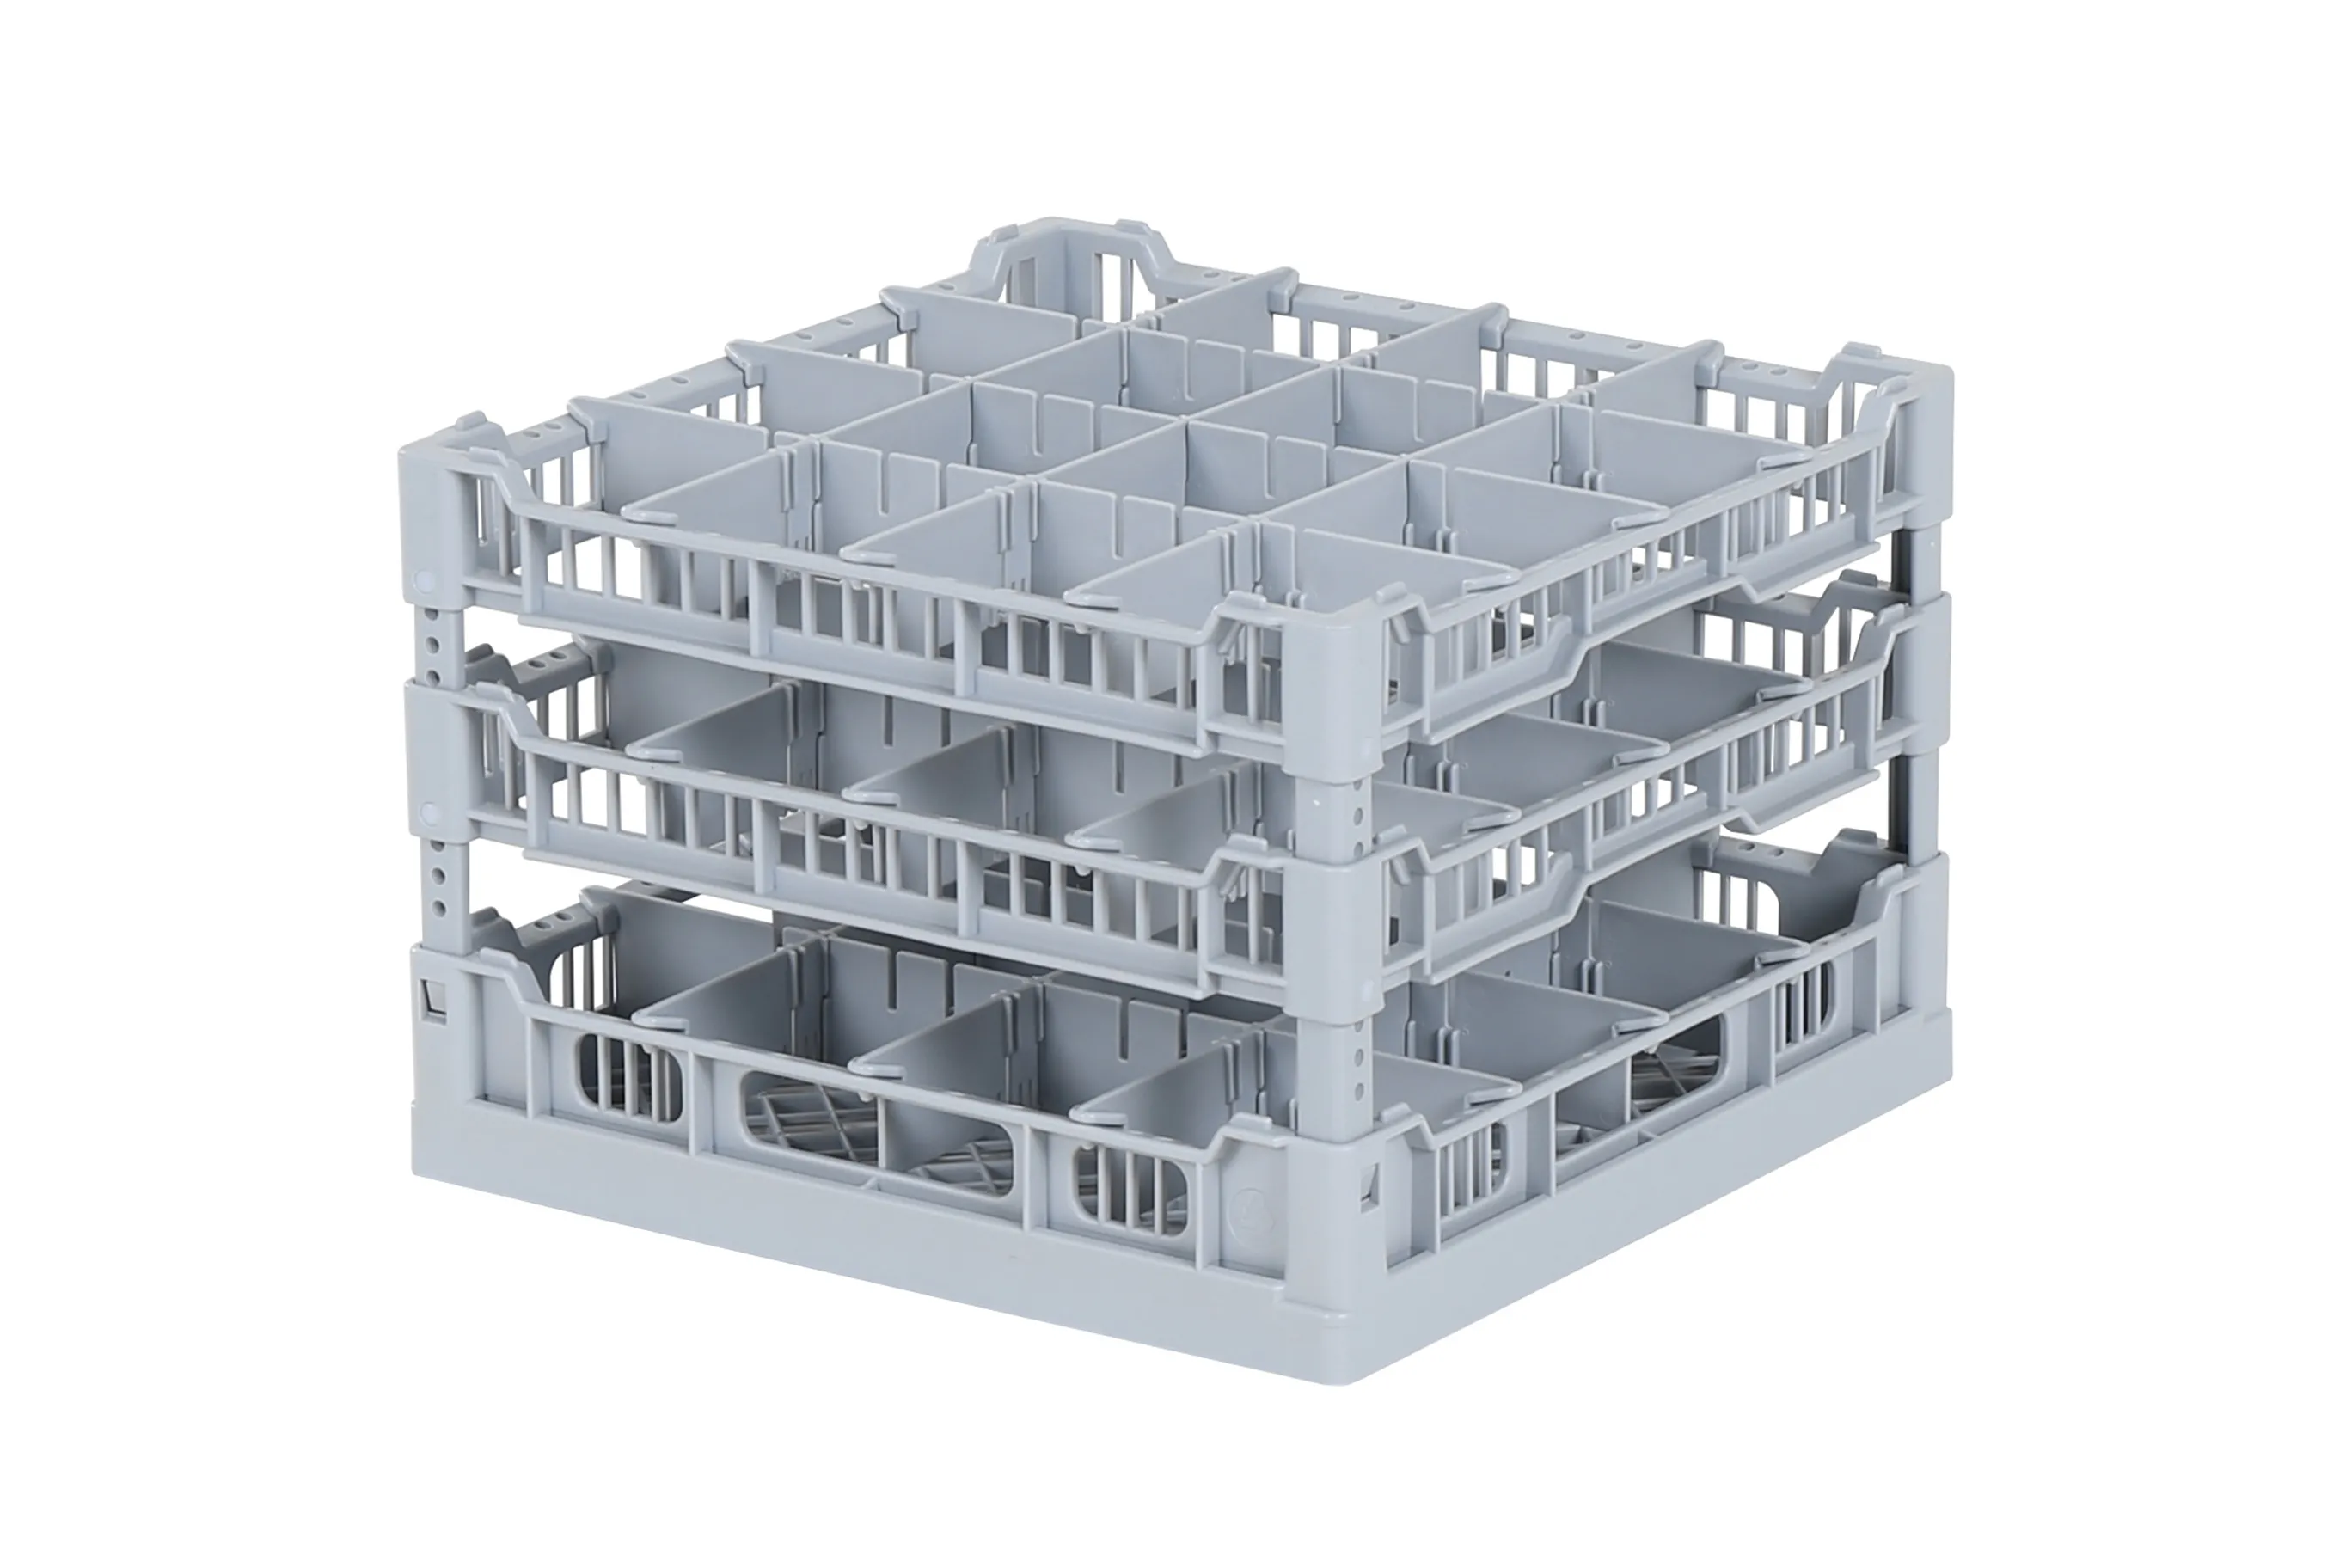 Dishwasher basket 400 x 400 mm - for glass heights from 241 to 252 mm - with 4 x 4 compartmentalization - maximum glass diameter 88mm